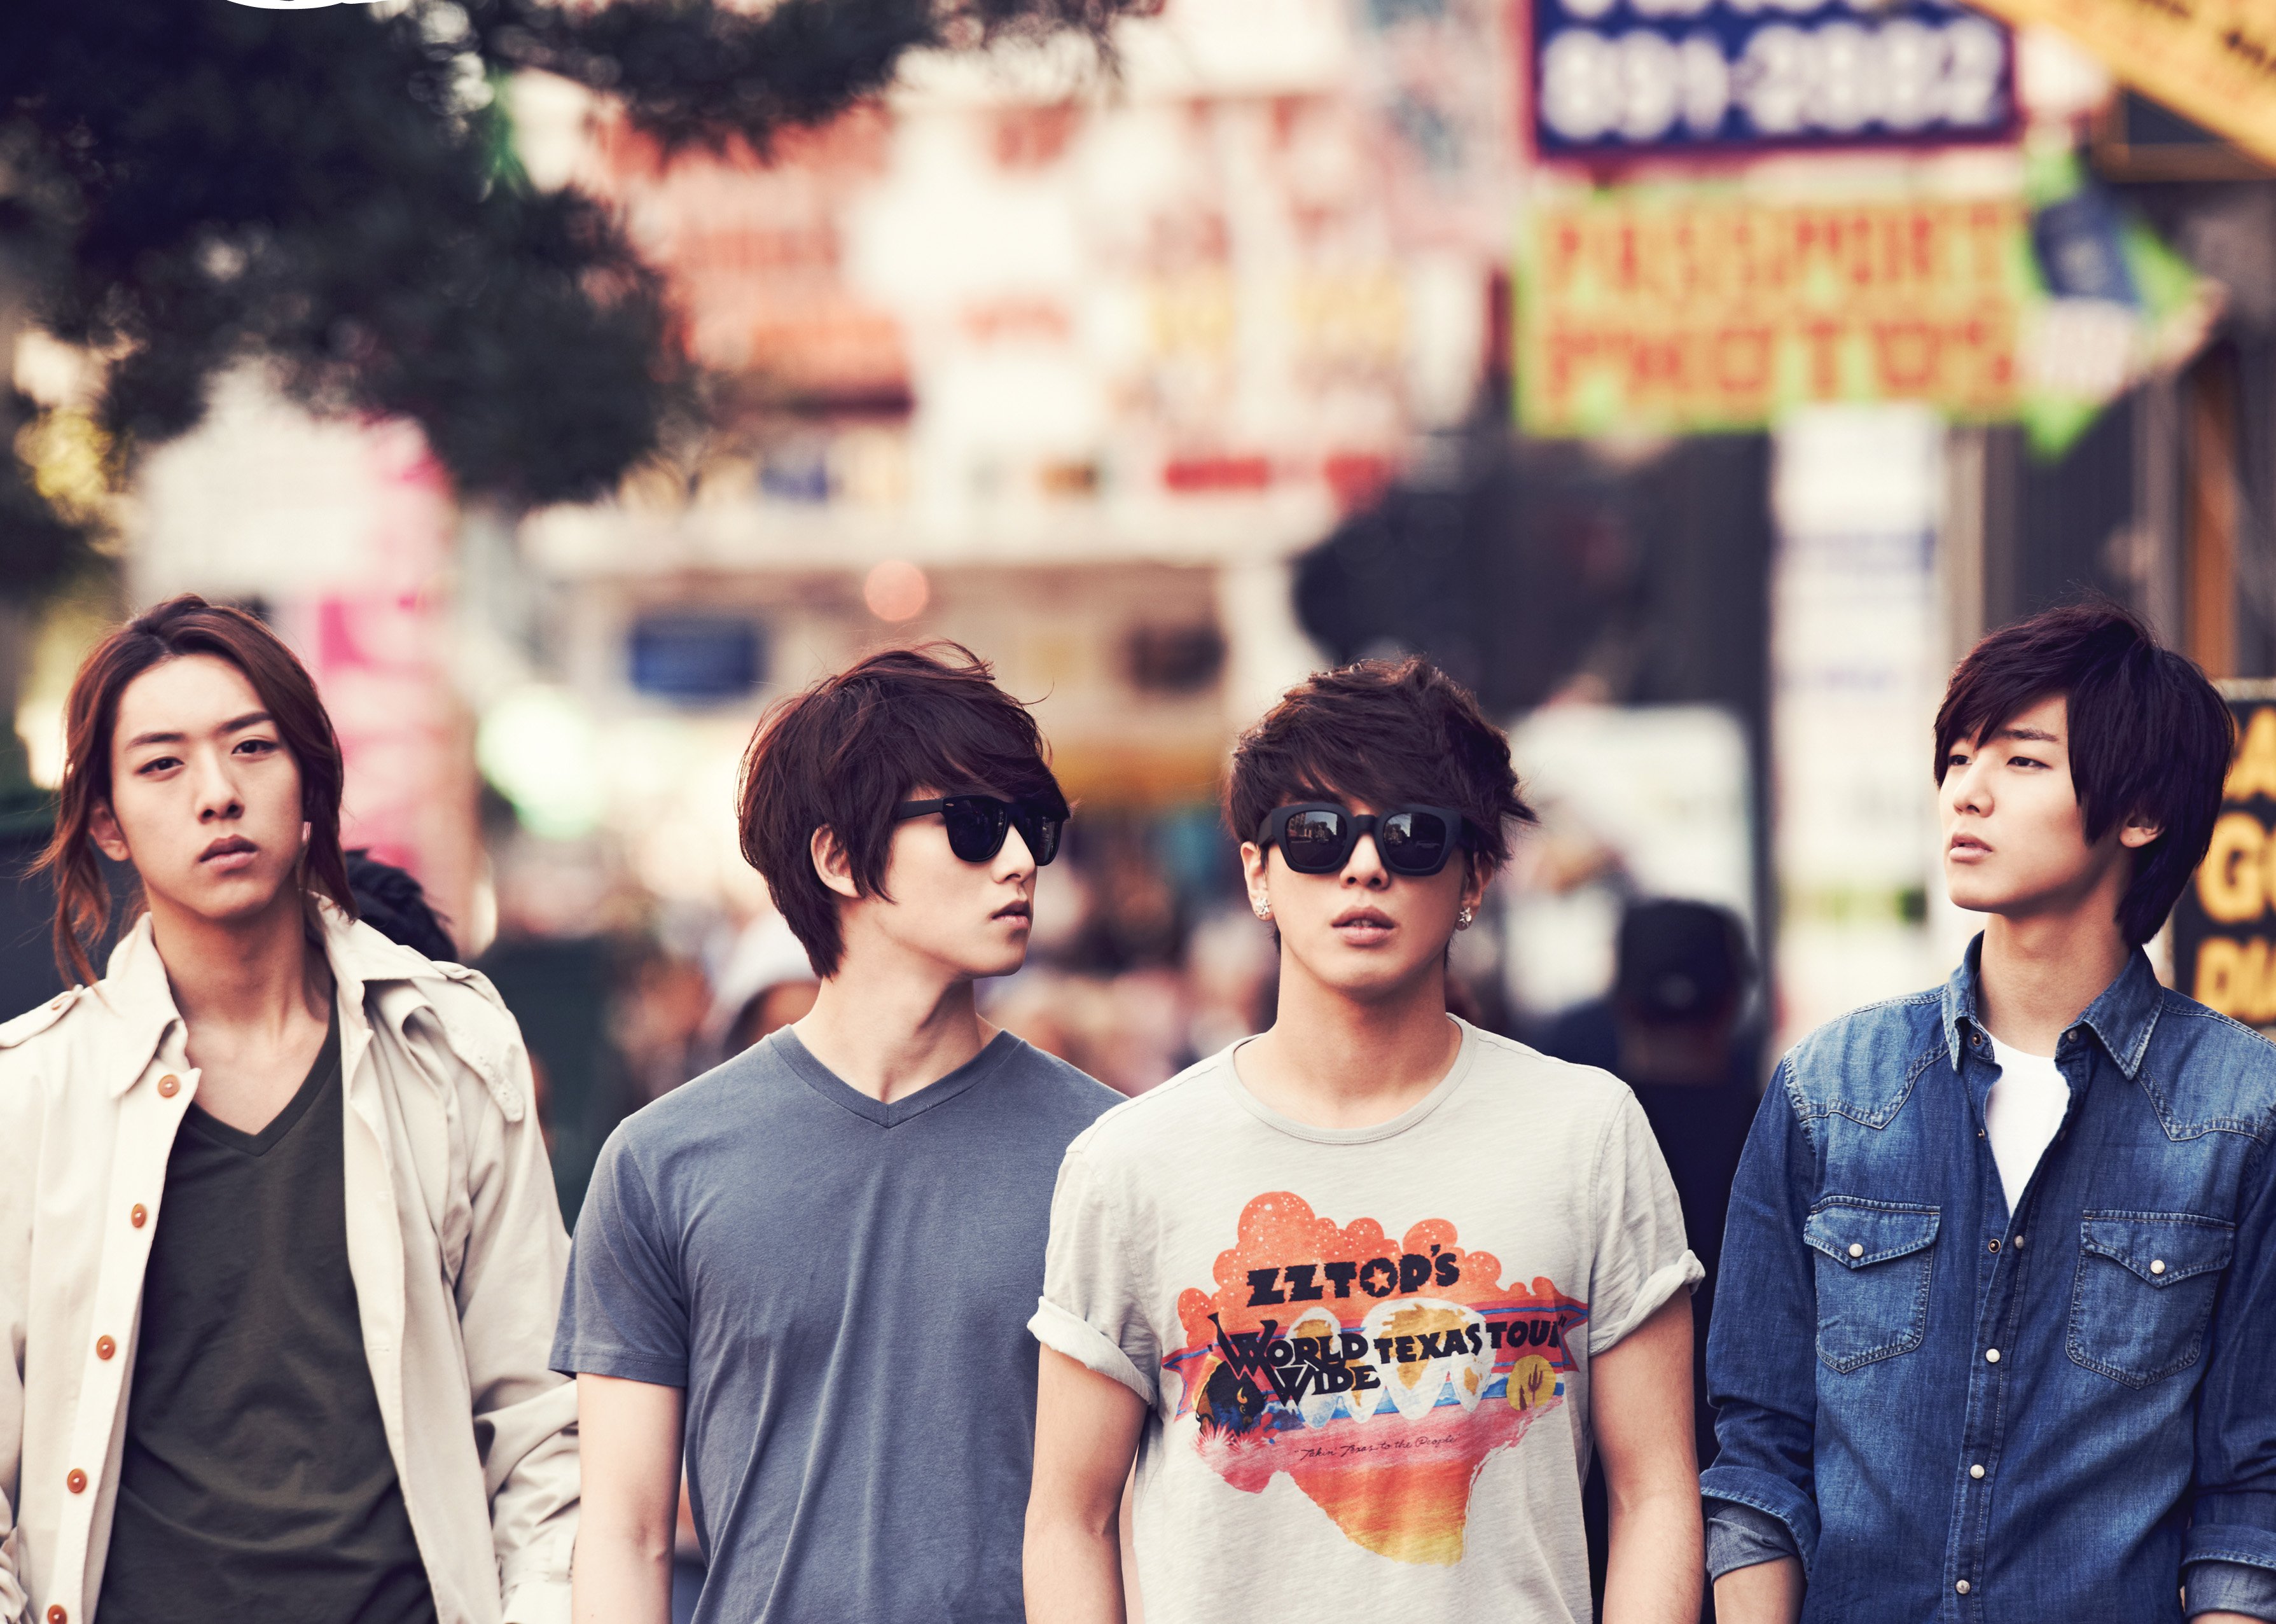 CNBLUE wallpapers | WallpaperUP